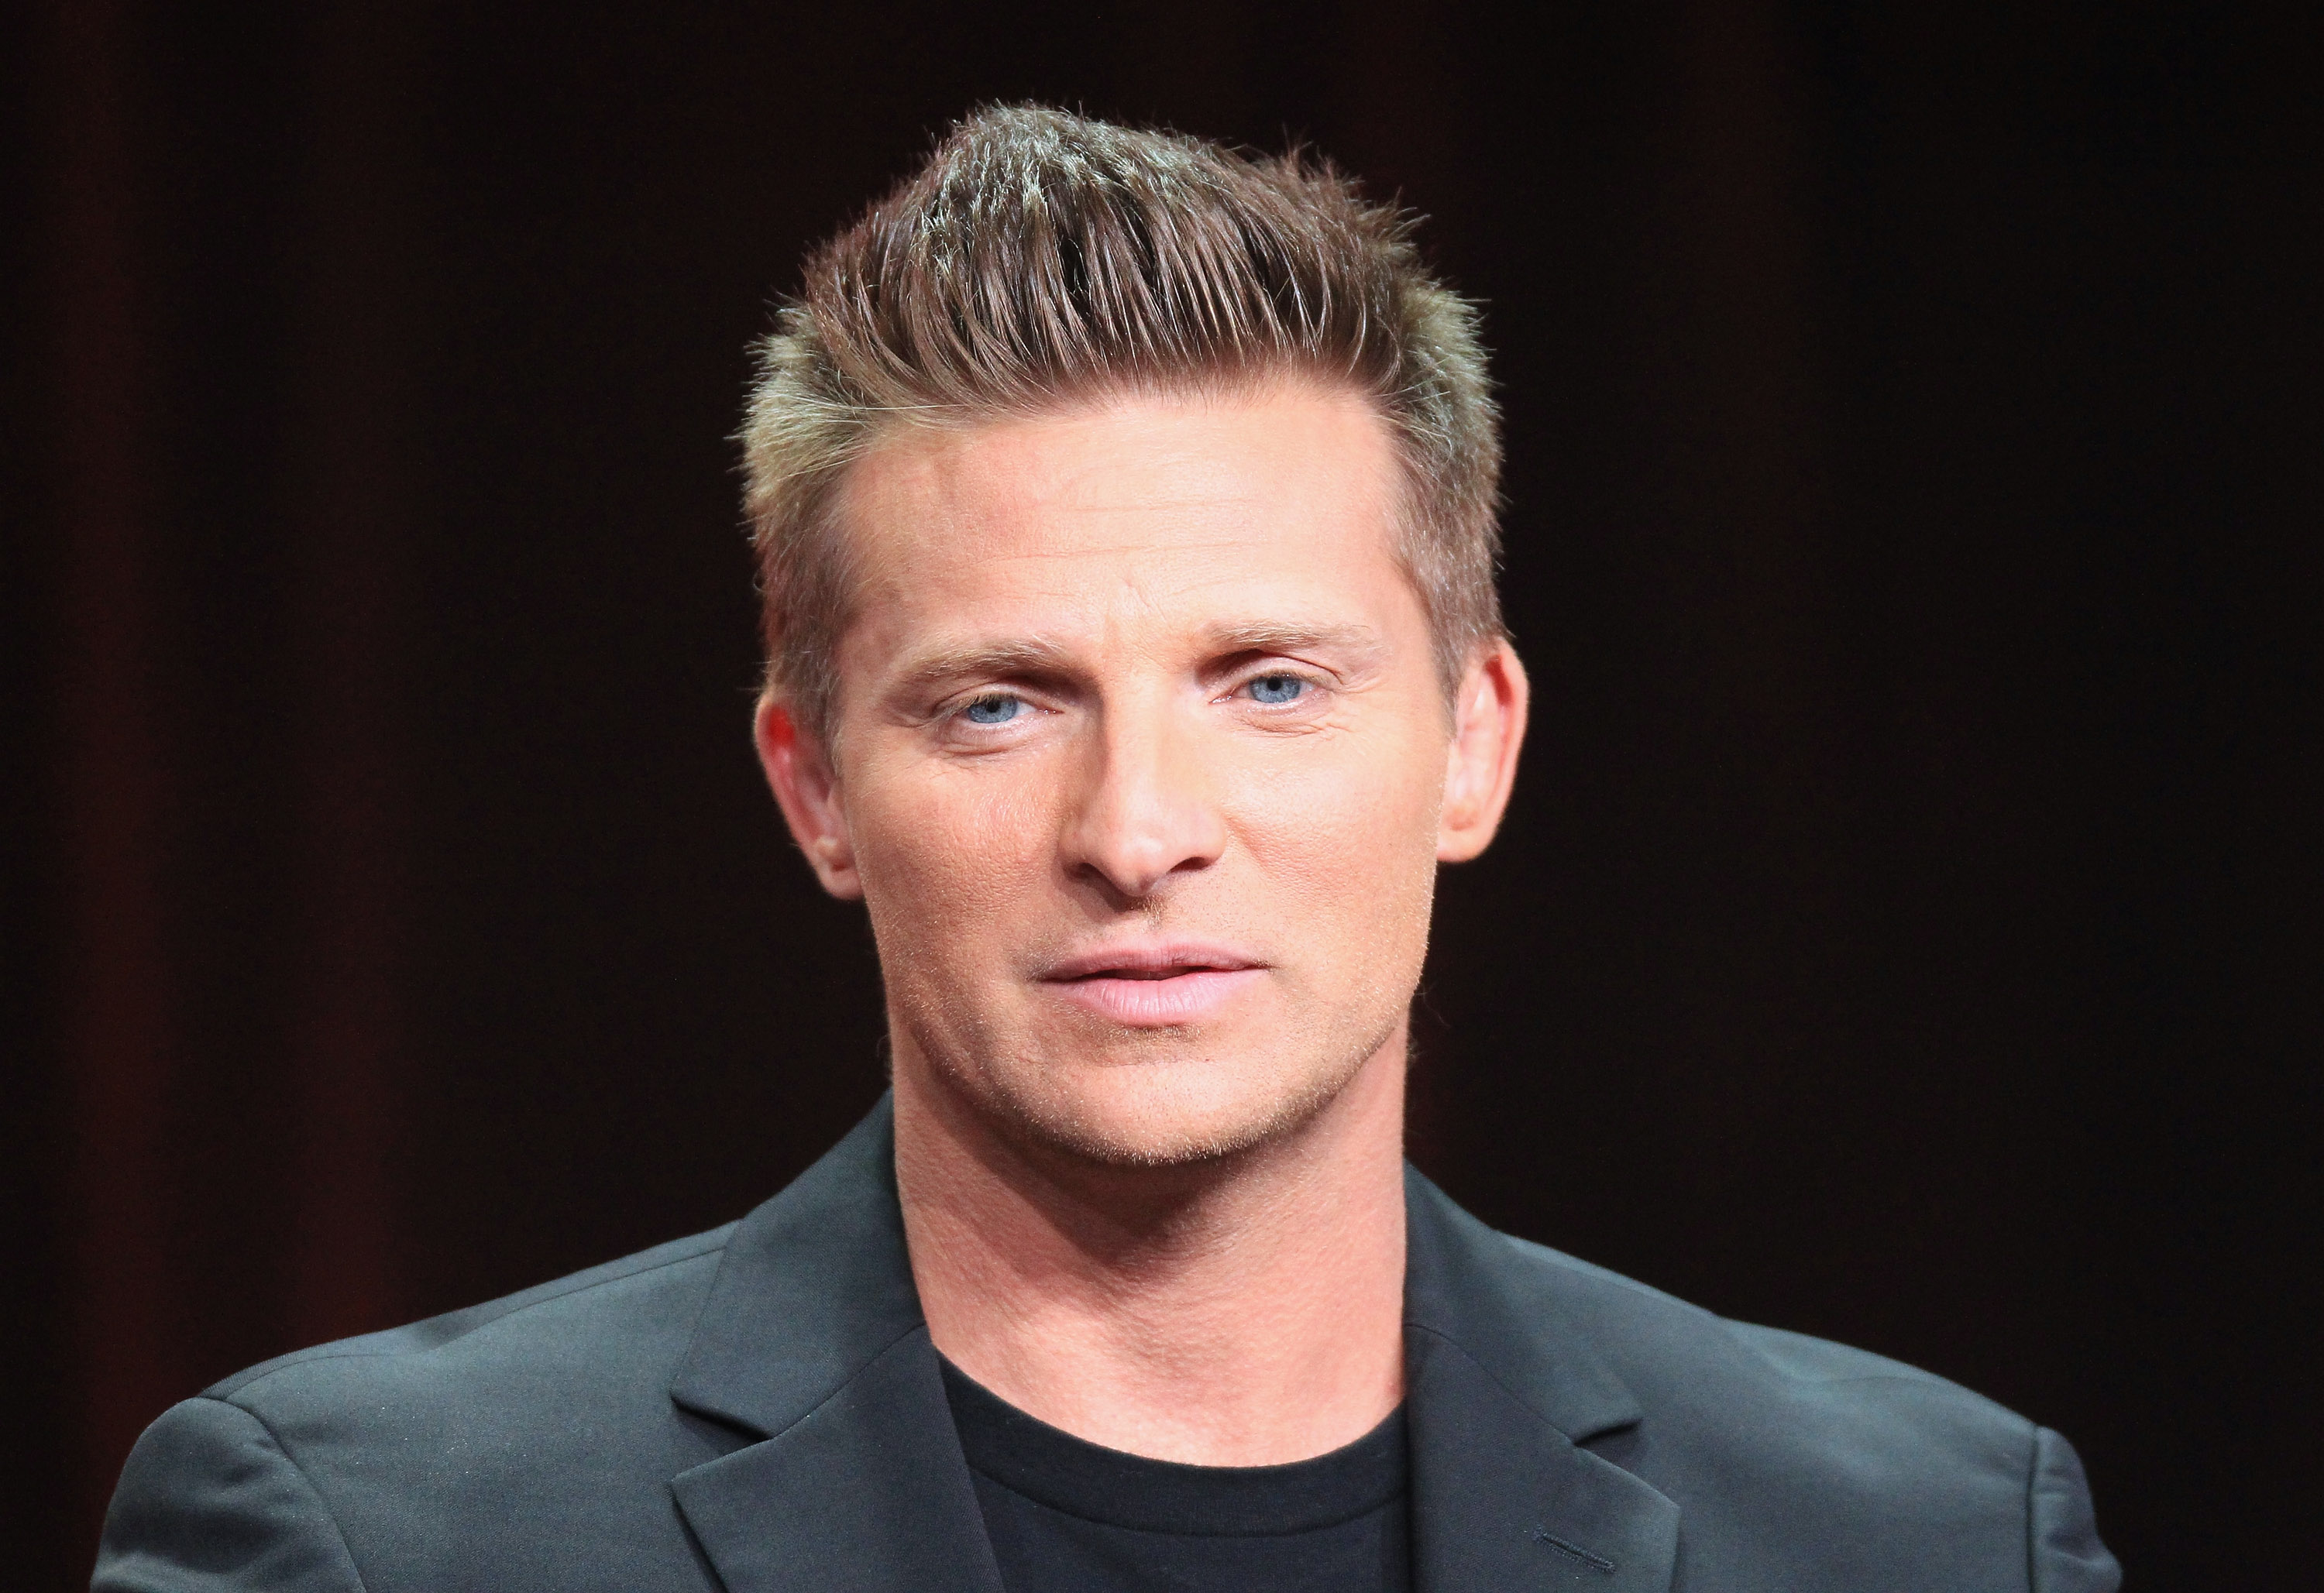 'The Young and the Restless' actor Steve Burton wearing a black suit and standing in front of a black backdrop.